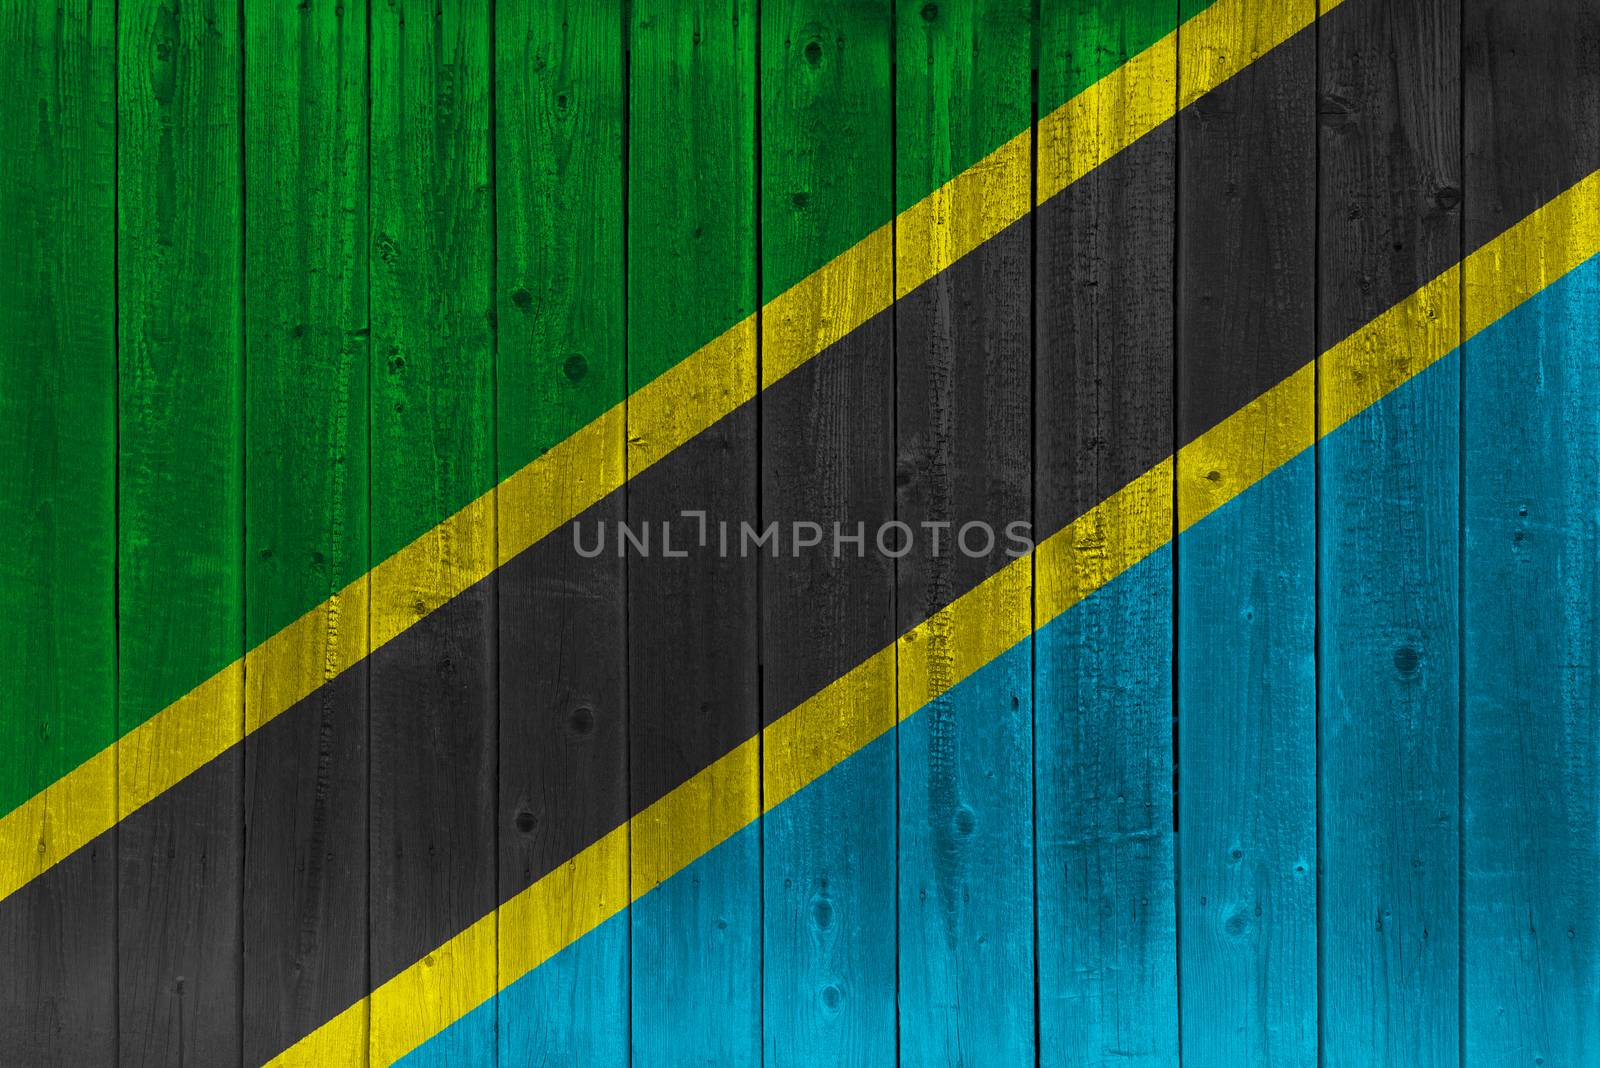 Tanzania flag painted on old wood plank. Patriotic background. National flag of Tanzania